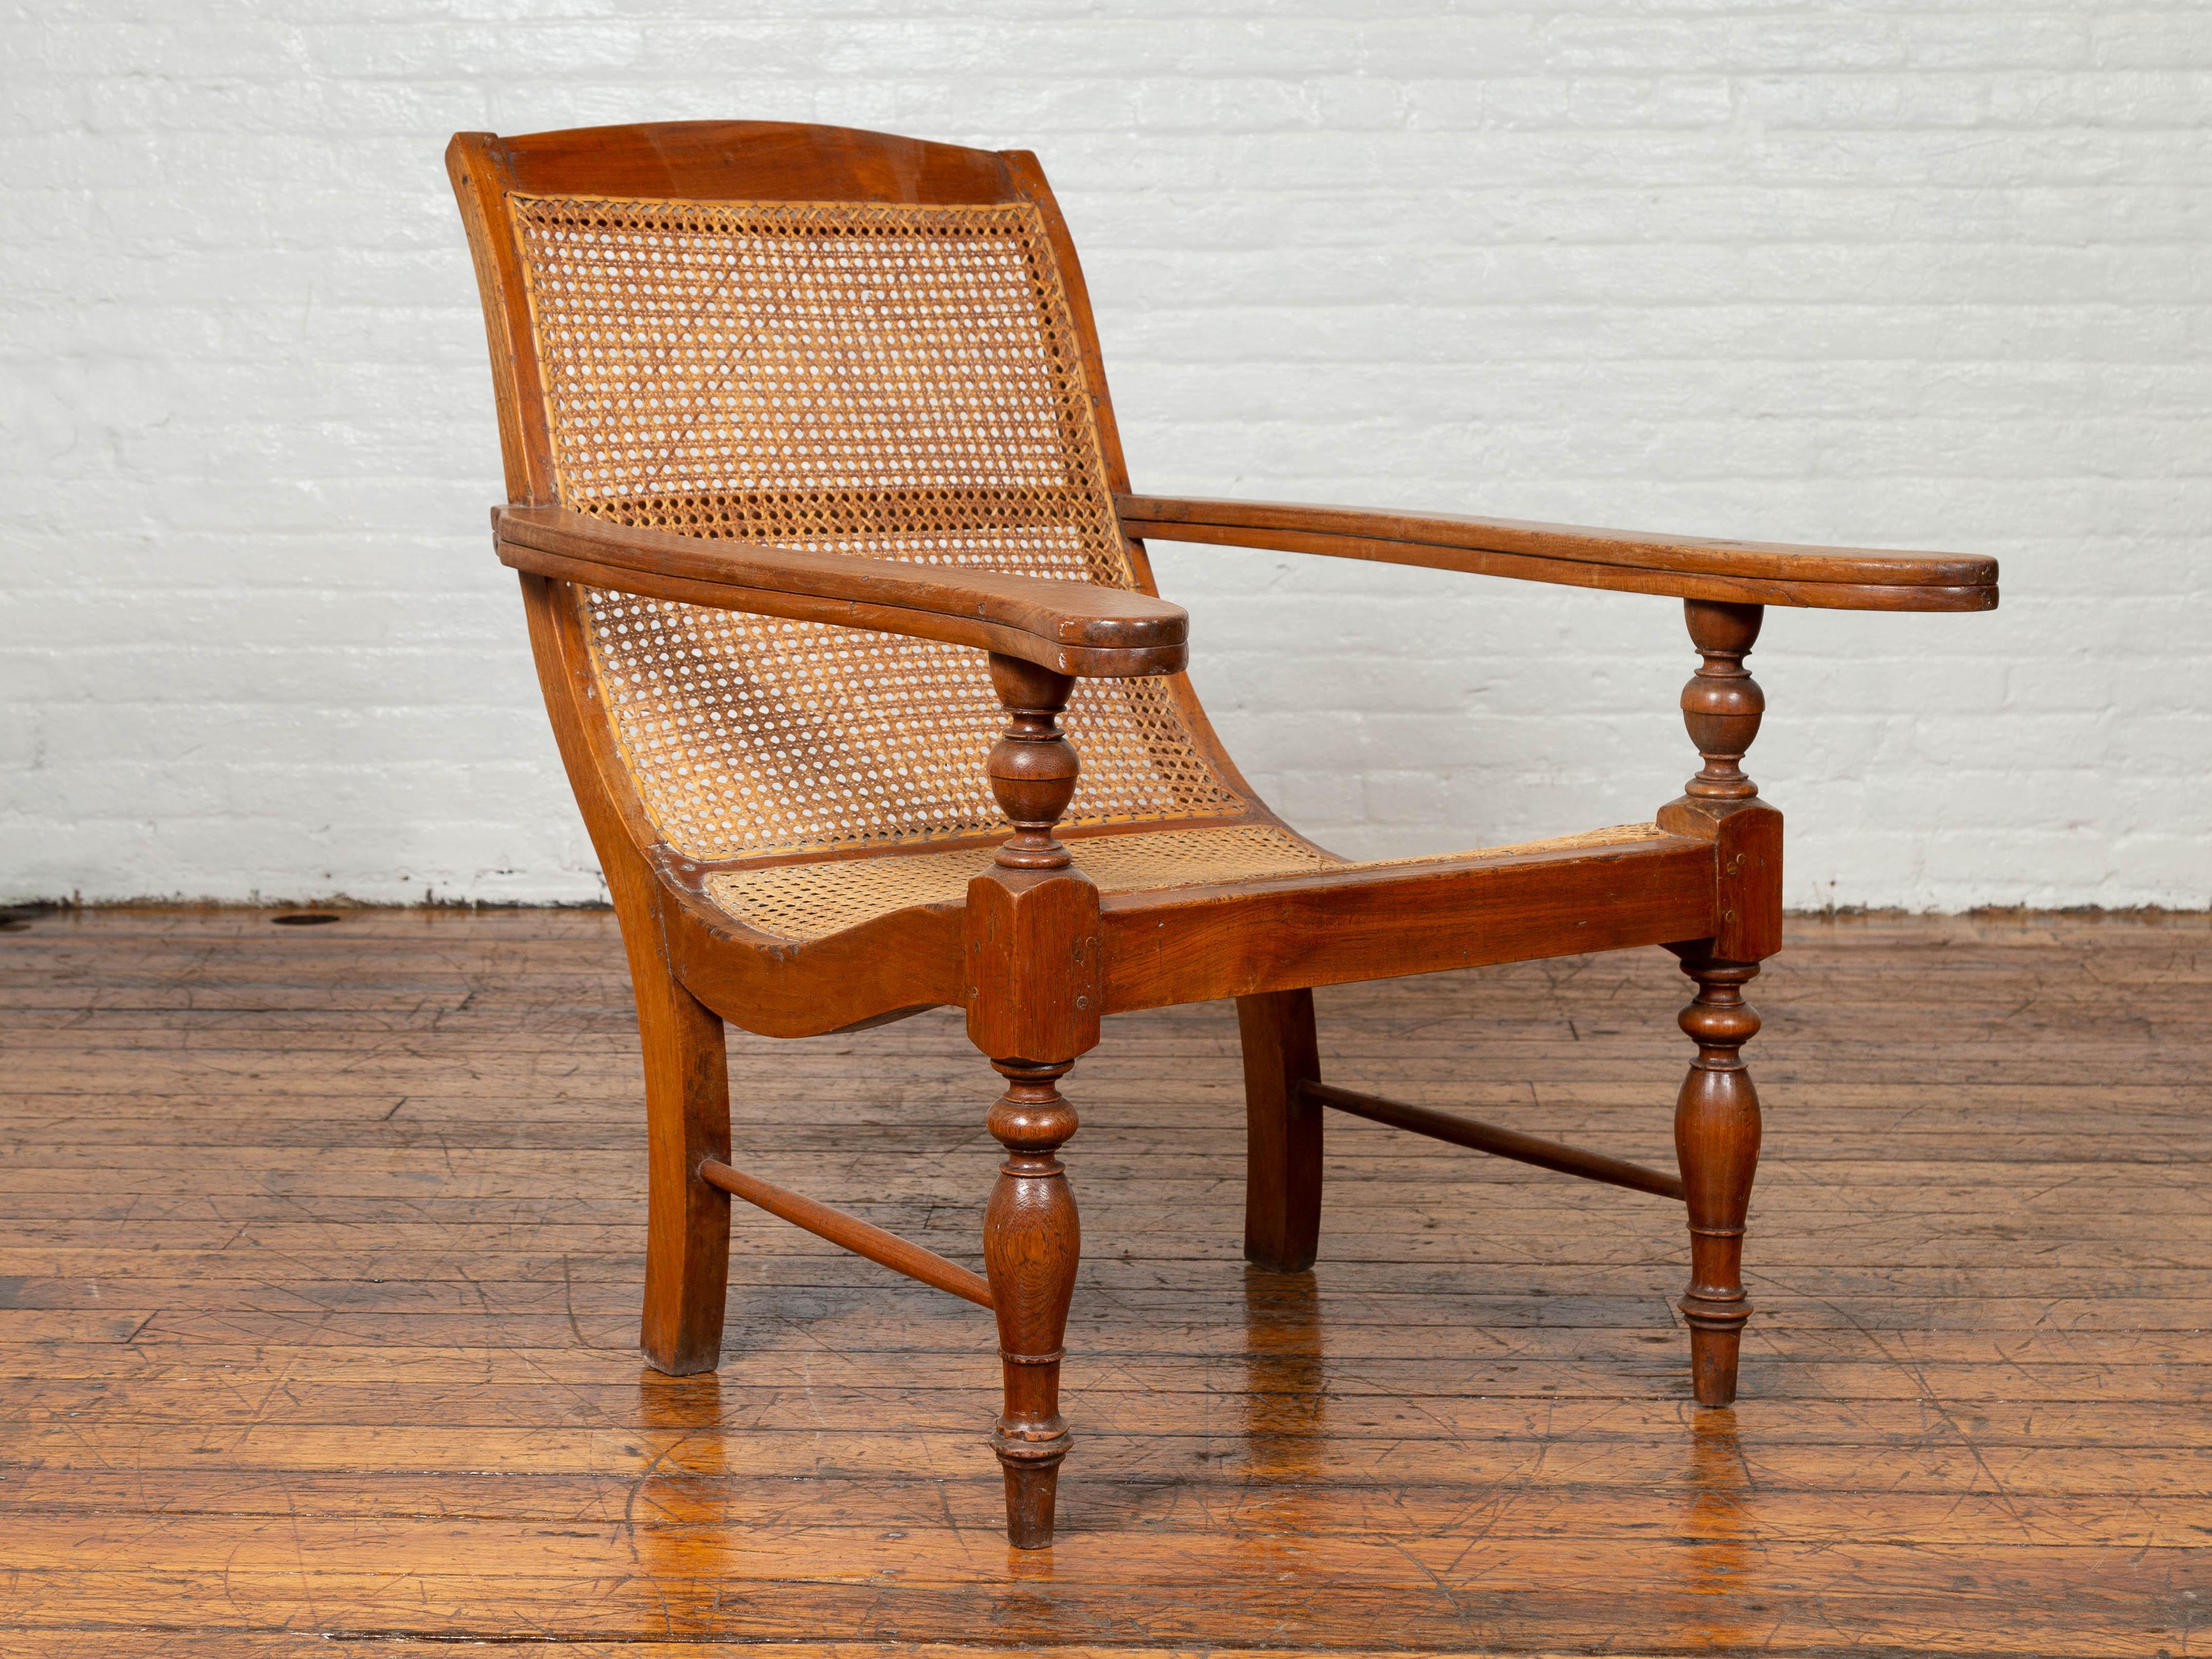 Dutch Colonial Vintage Teak Plantation Lounge Chair with Curving Seat and Rattan 1